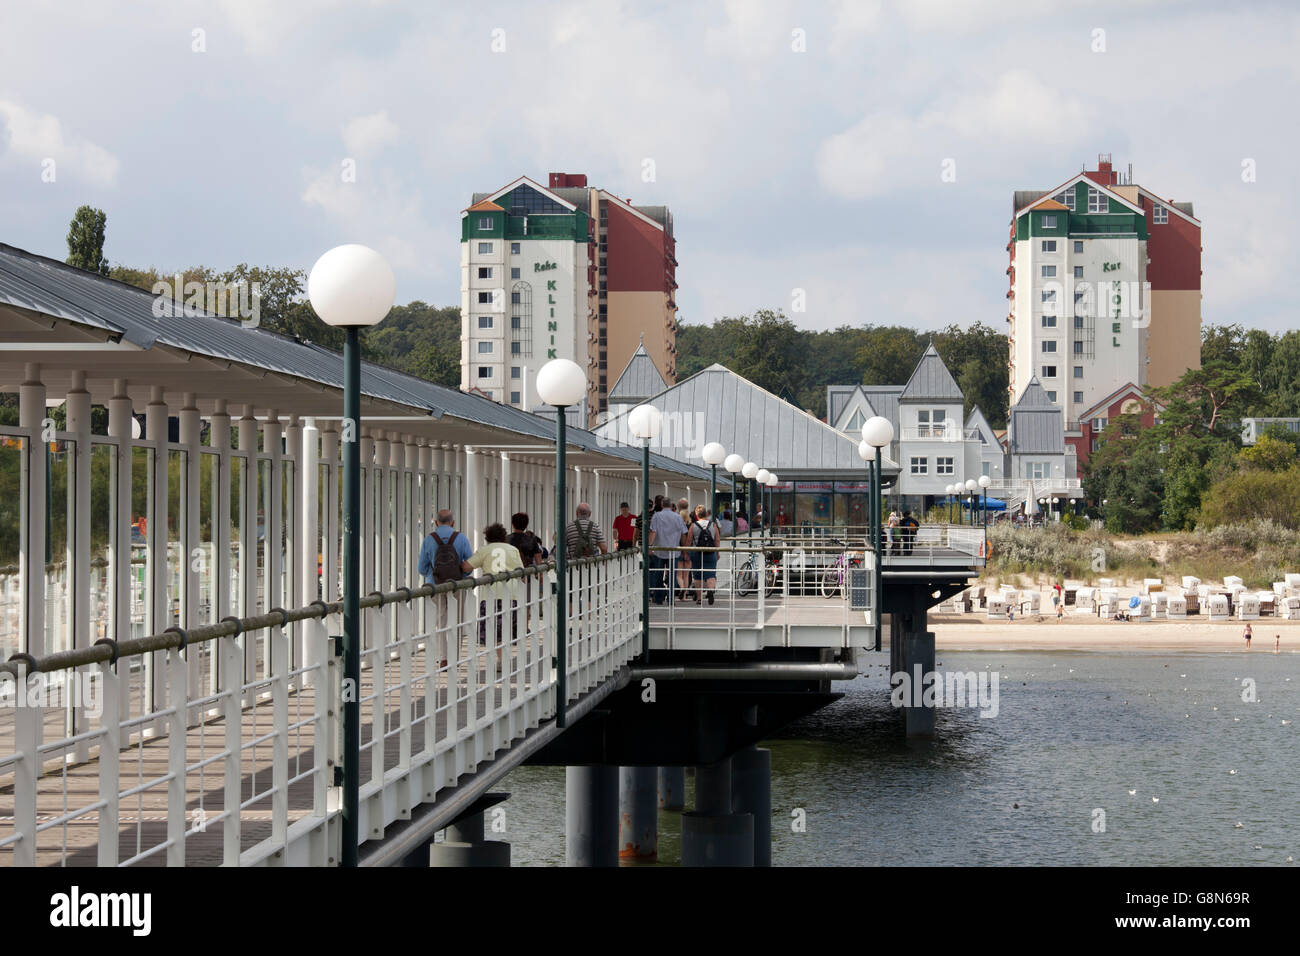 Heringsdorf seaside resort, town, pier, rehab clinic, spa hotel and beach as seen from the pier, Usedom, Baltic Sea Stock Photo